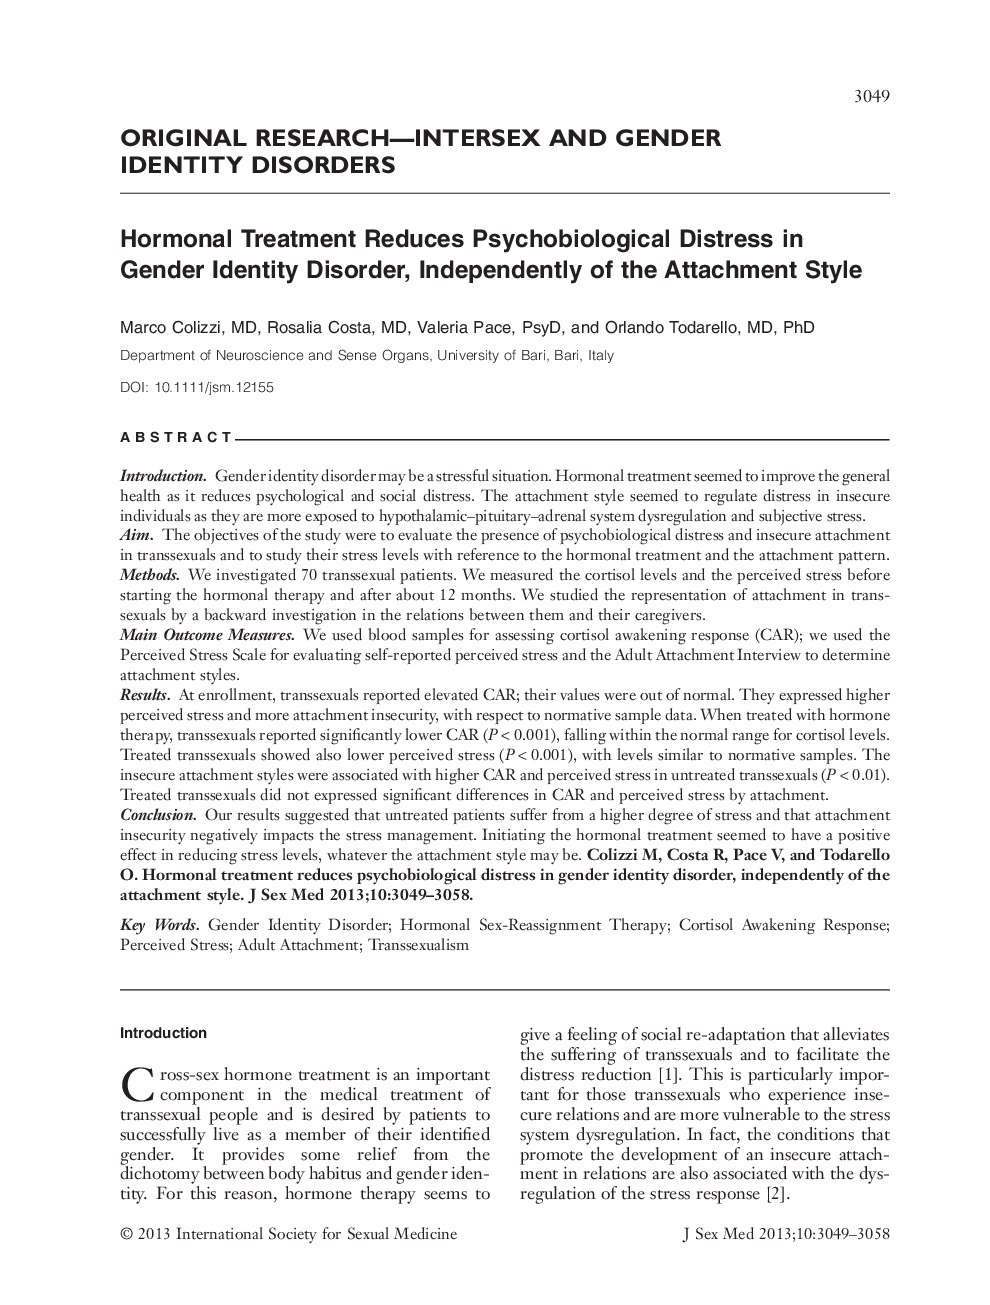 Hormonal Treatment Reduces Psychobiological Distress in Gender Identity Disorder, Independently of the Attachment Style 